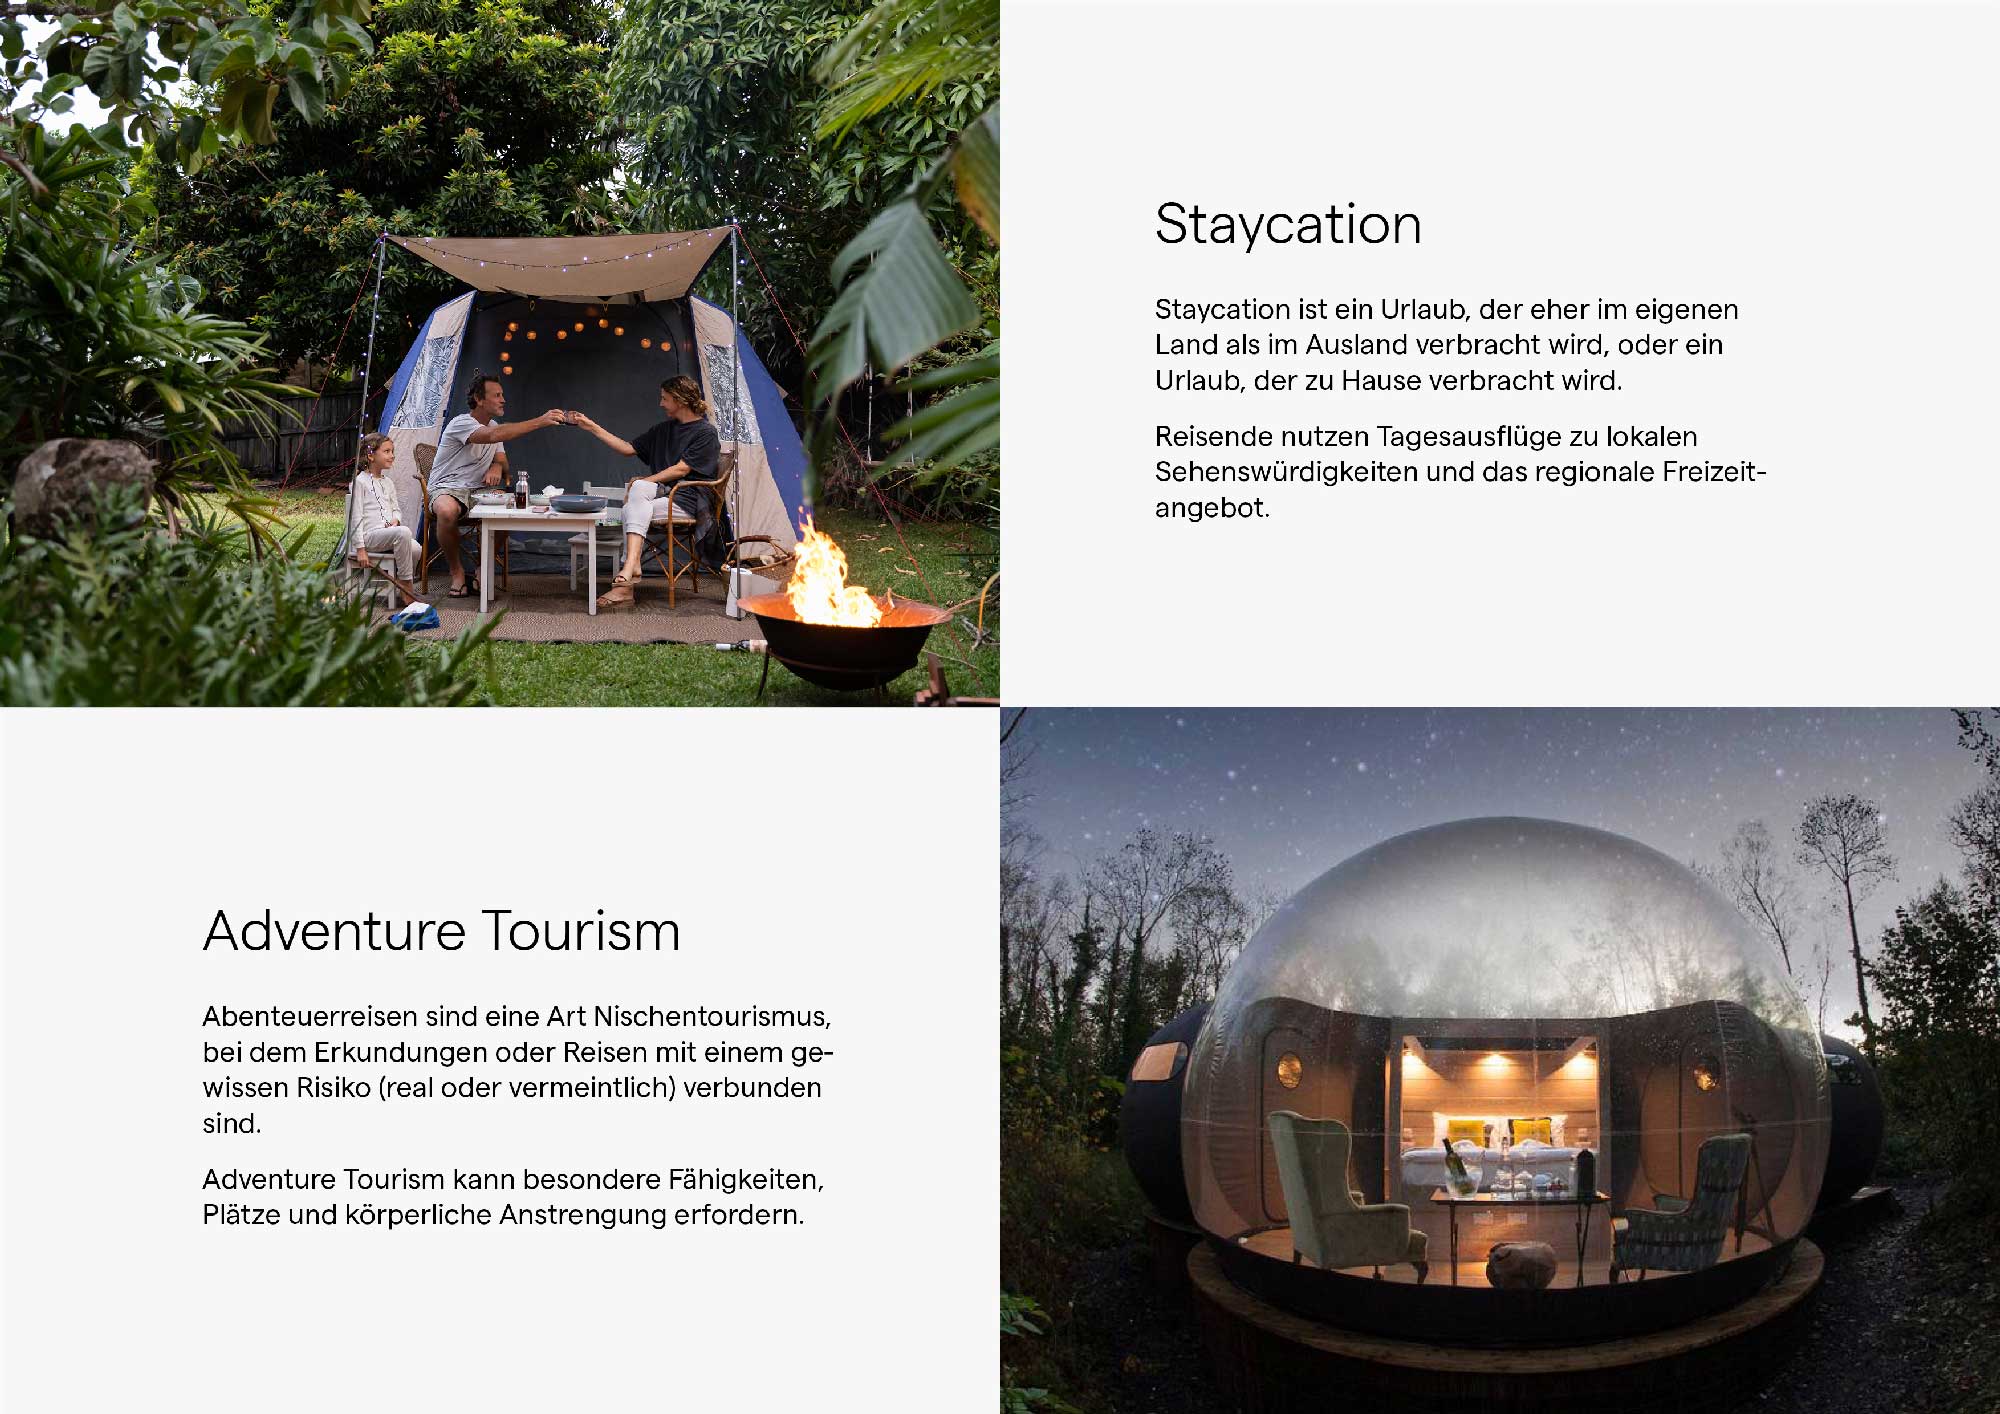 This image shows two trends in tourism: staycation and adventure tourism.